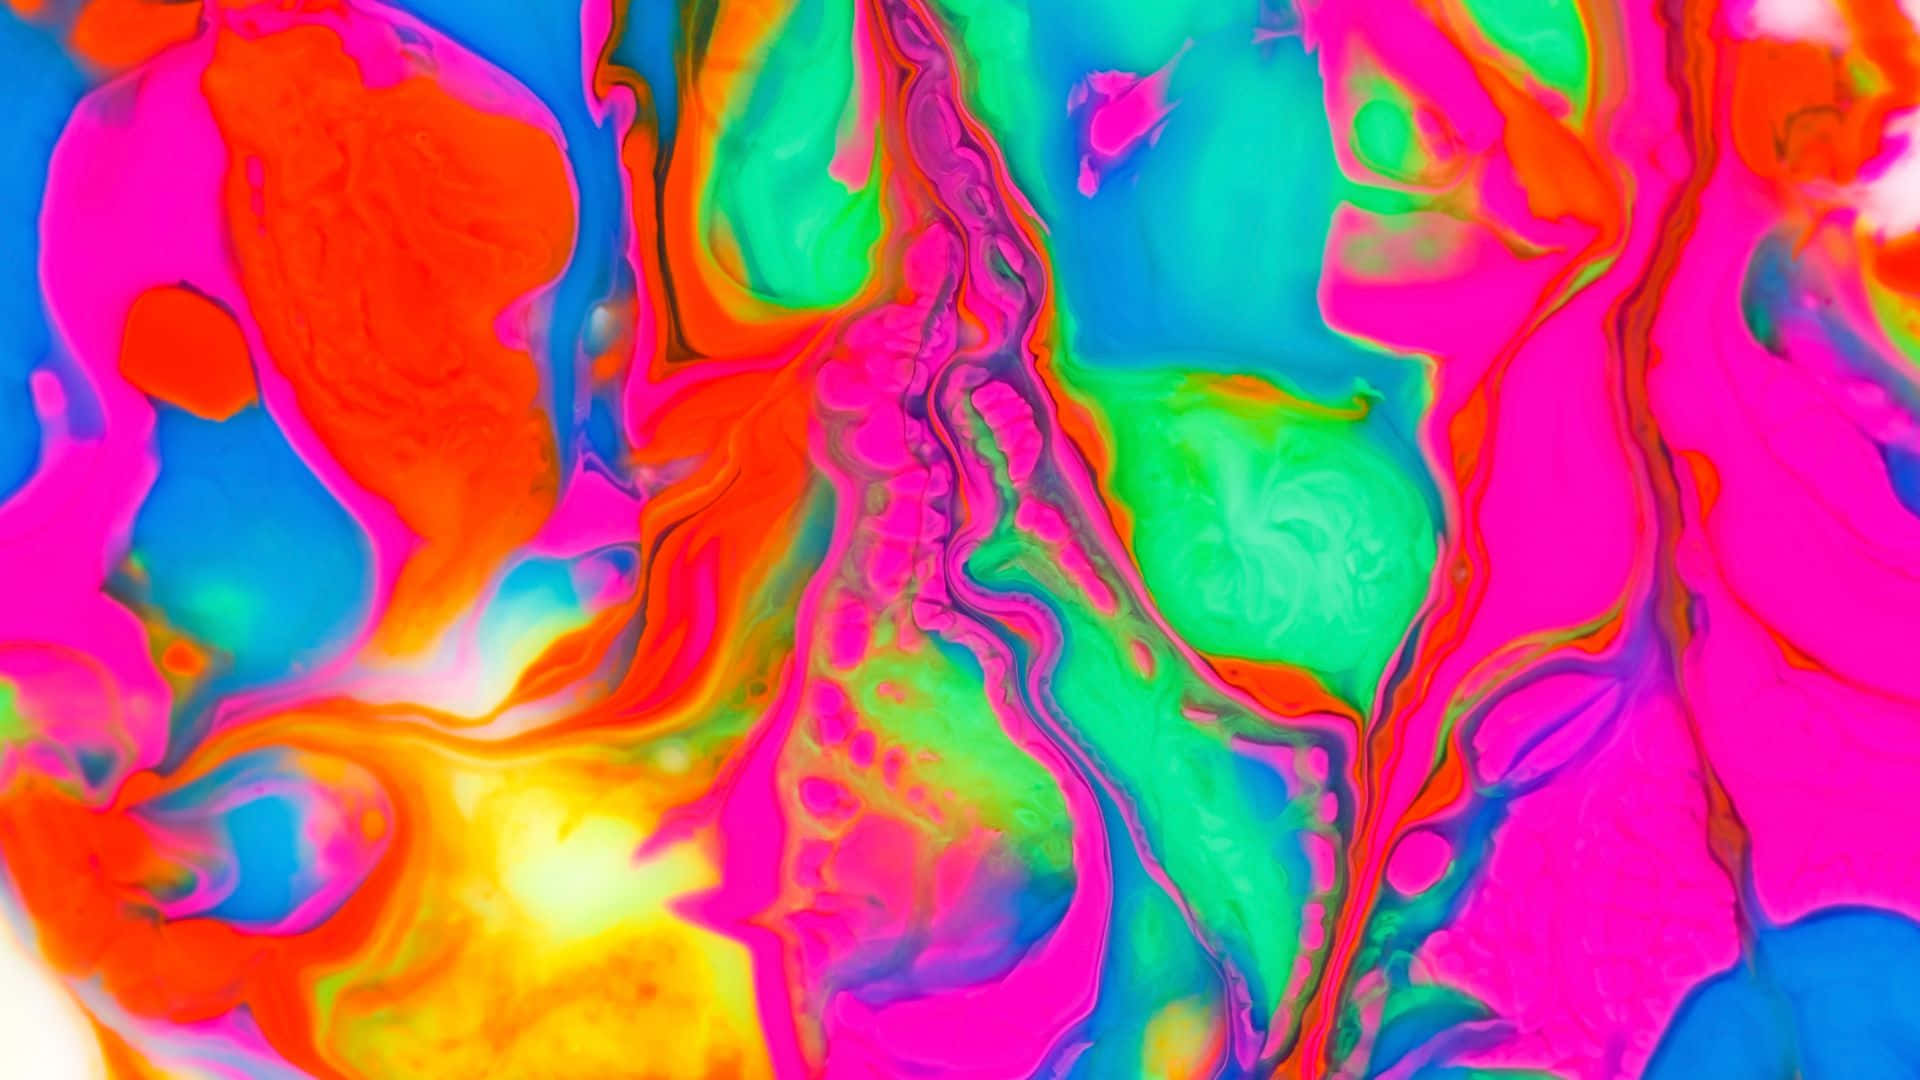 A Colorful Painting Of A Colorful Liquid